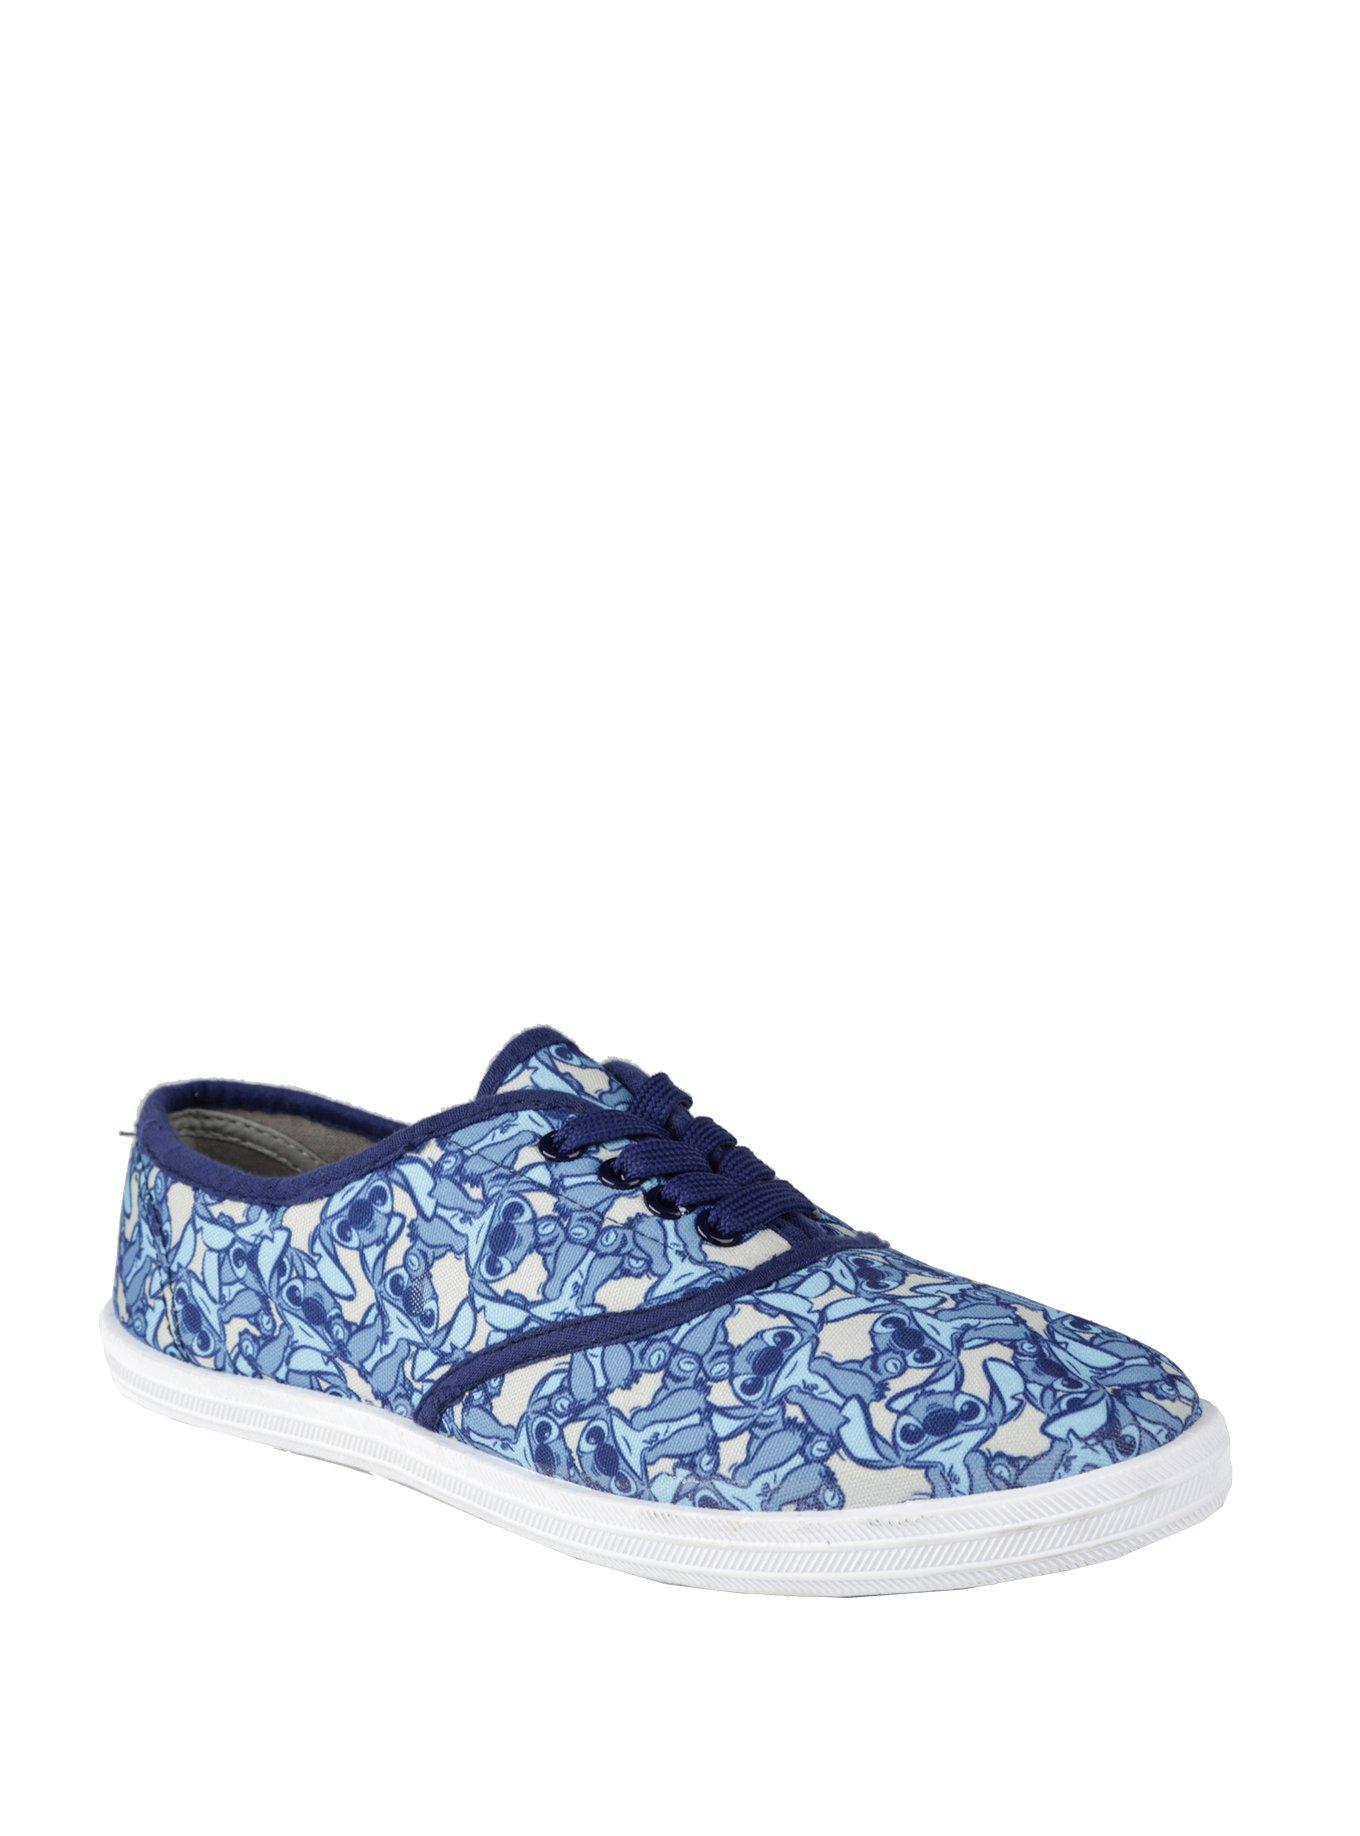 Disney Lilo & Stitch Lace-Up Sneakers | Hot Topic